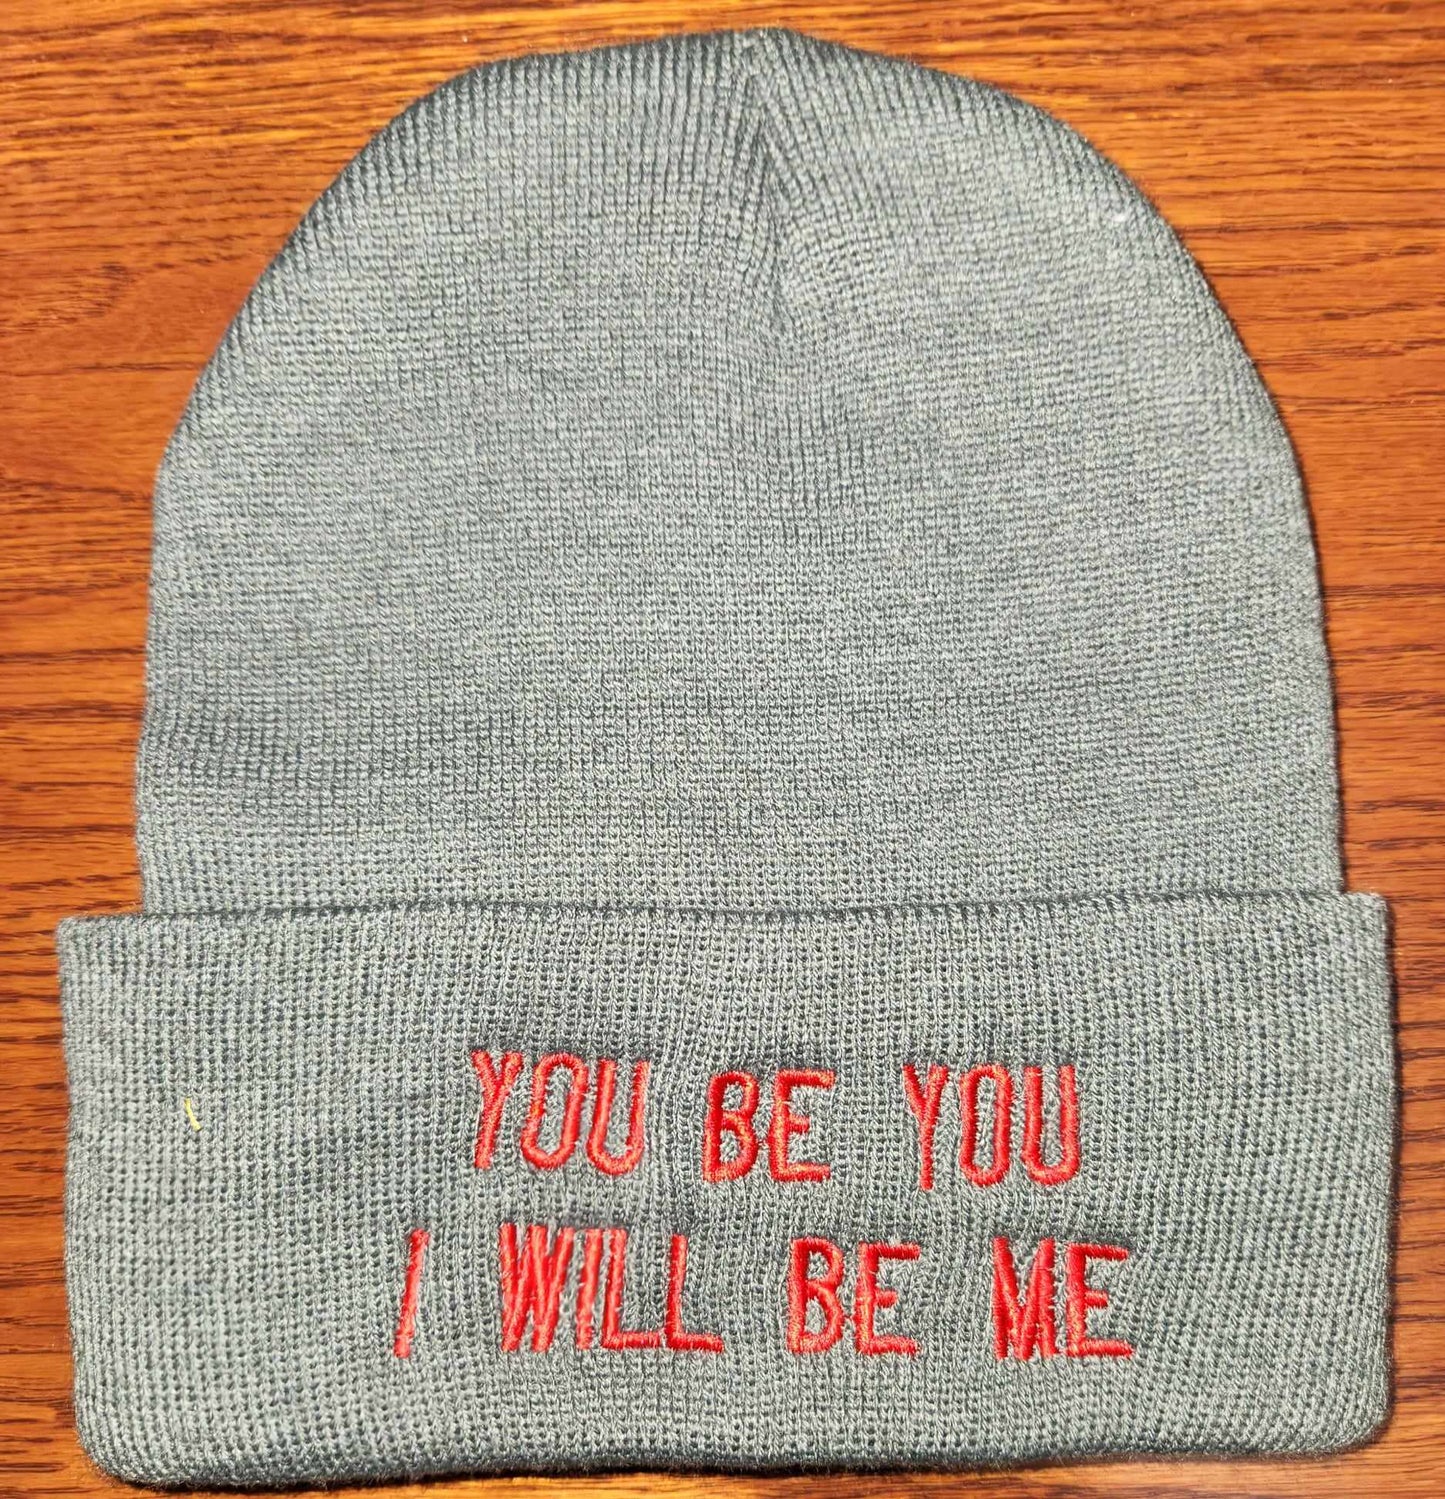 You Be You I Will Be Me Toques (Custom Order)